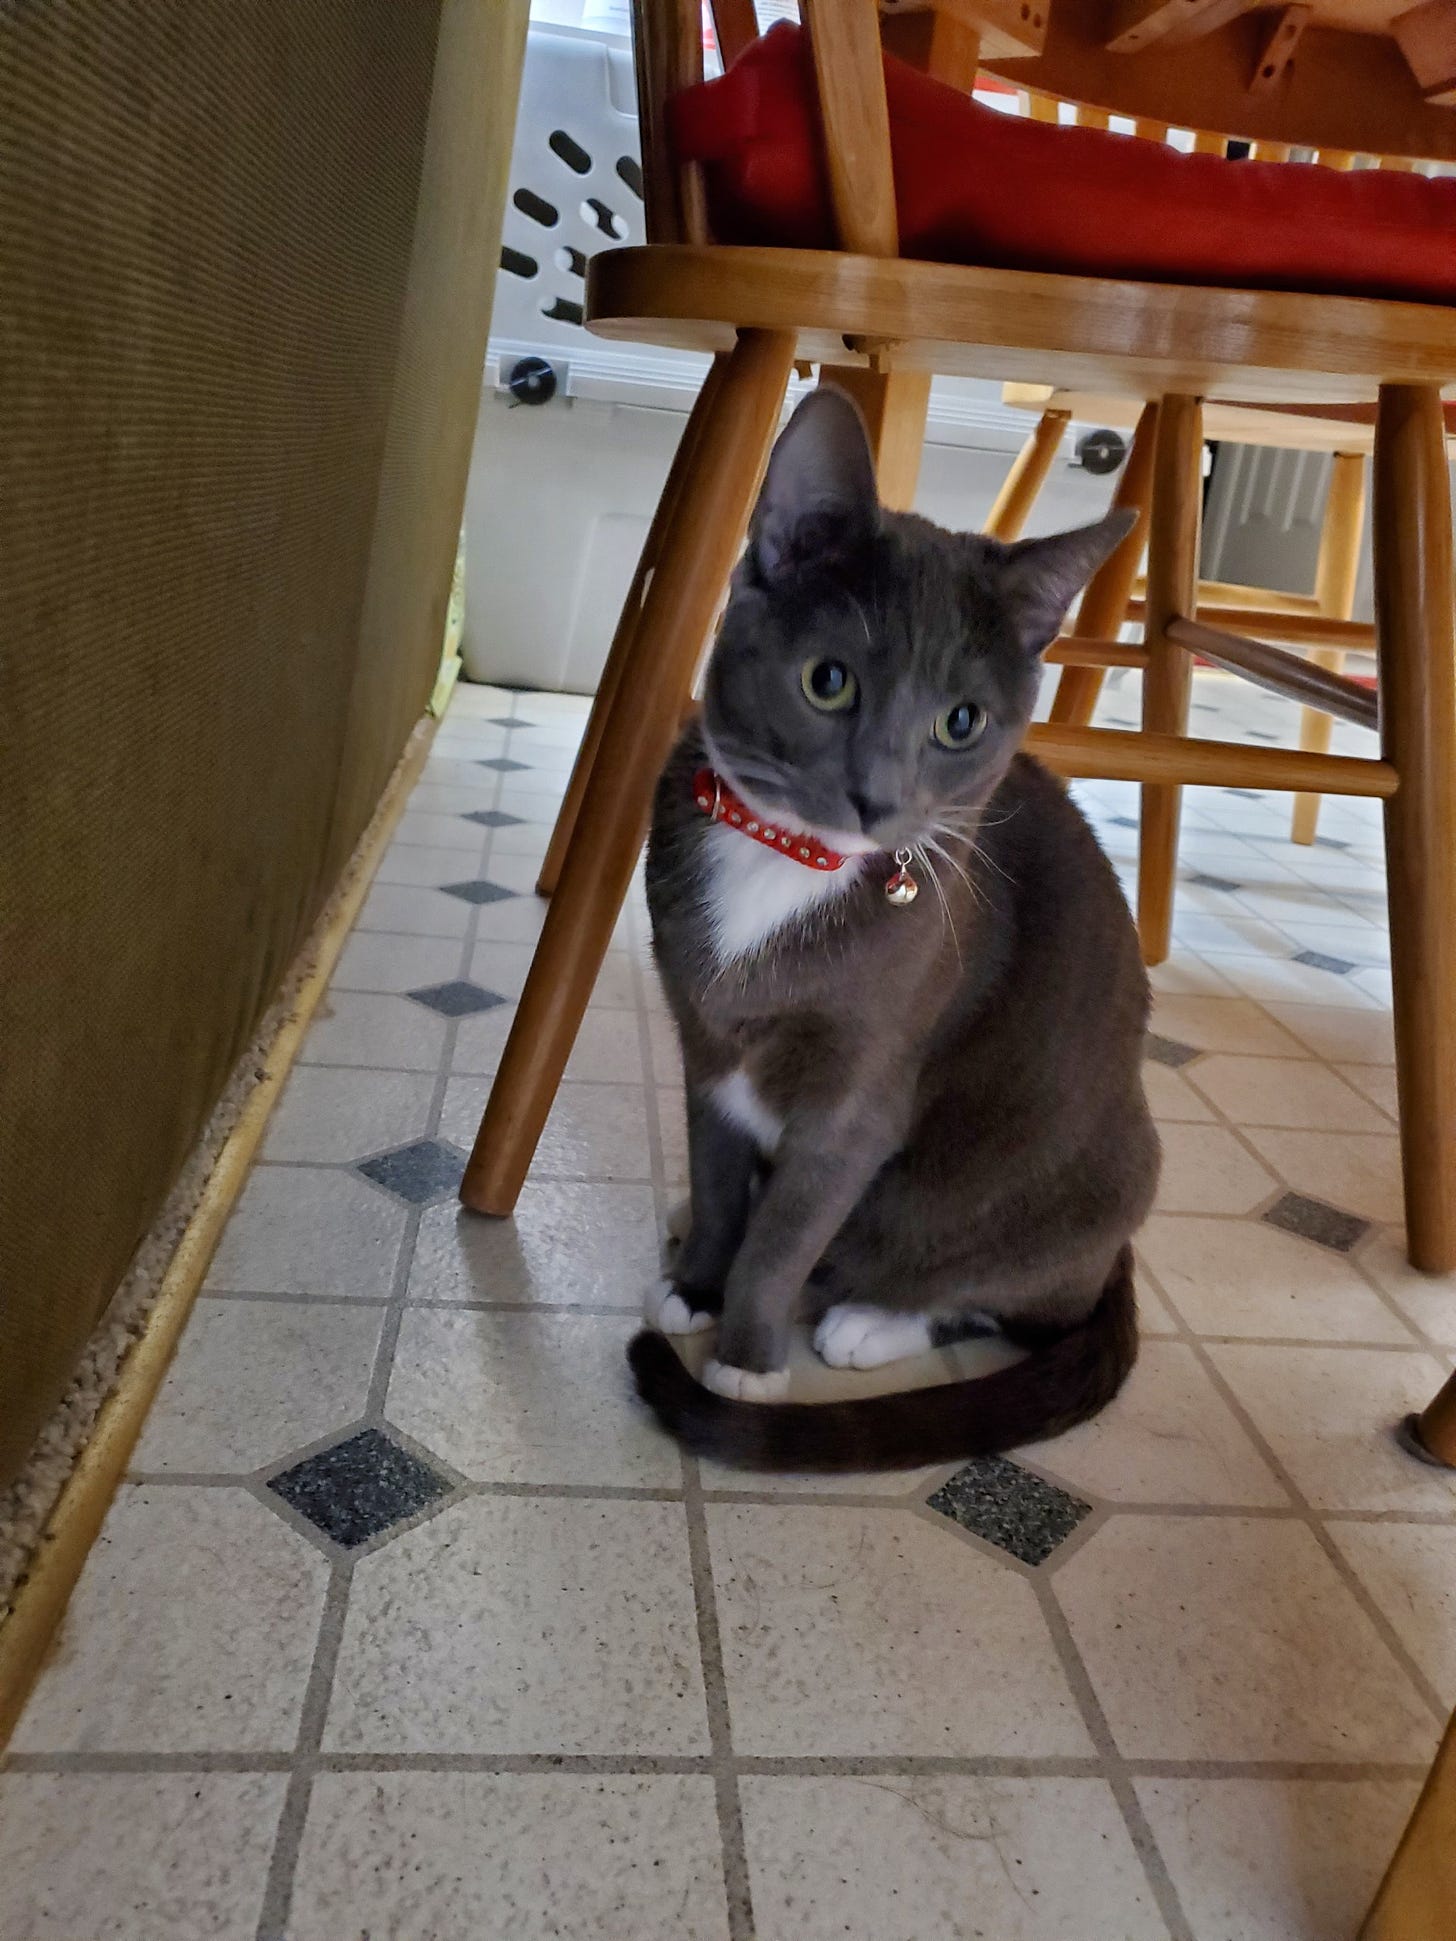 Gray cat with white paws sitting under wooden chair